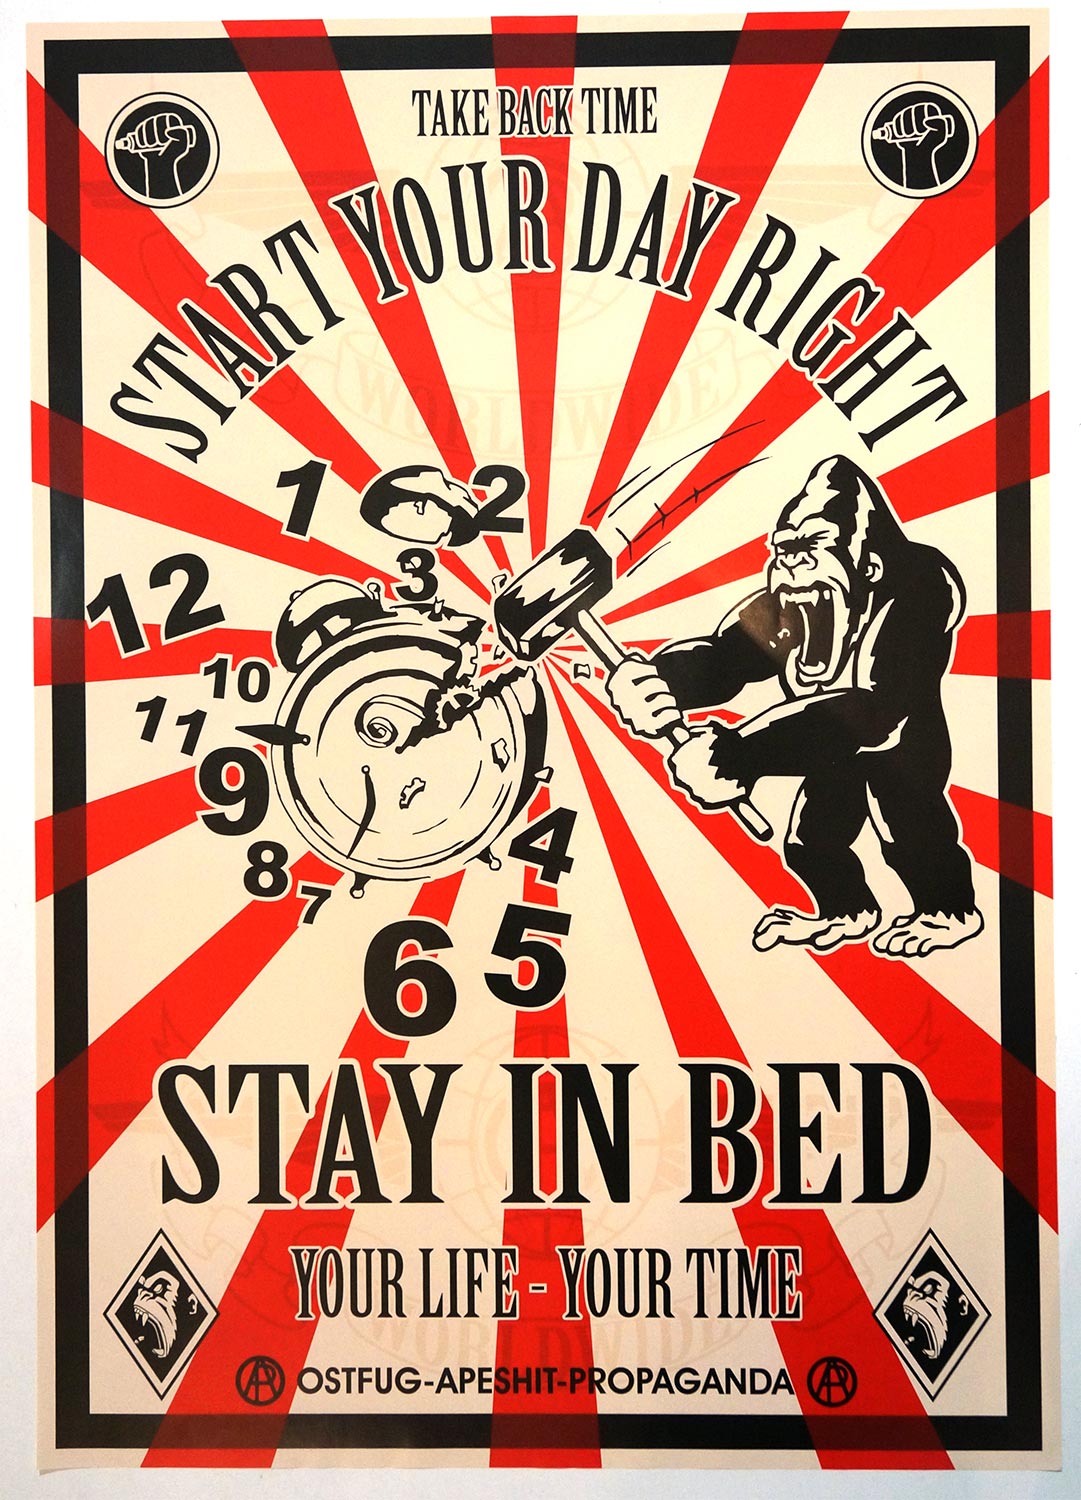 Ostfug: Start Your Day Right - Stay In Bed - Streetart - SALZIGberlin